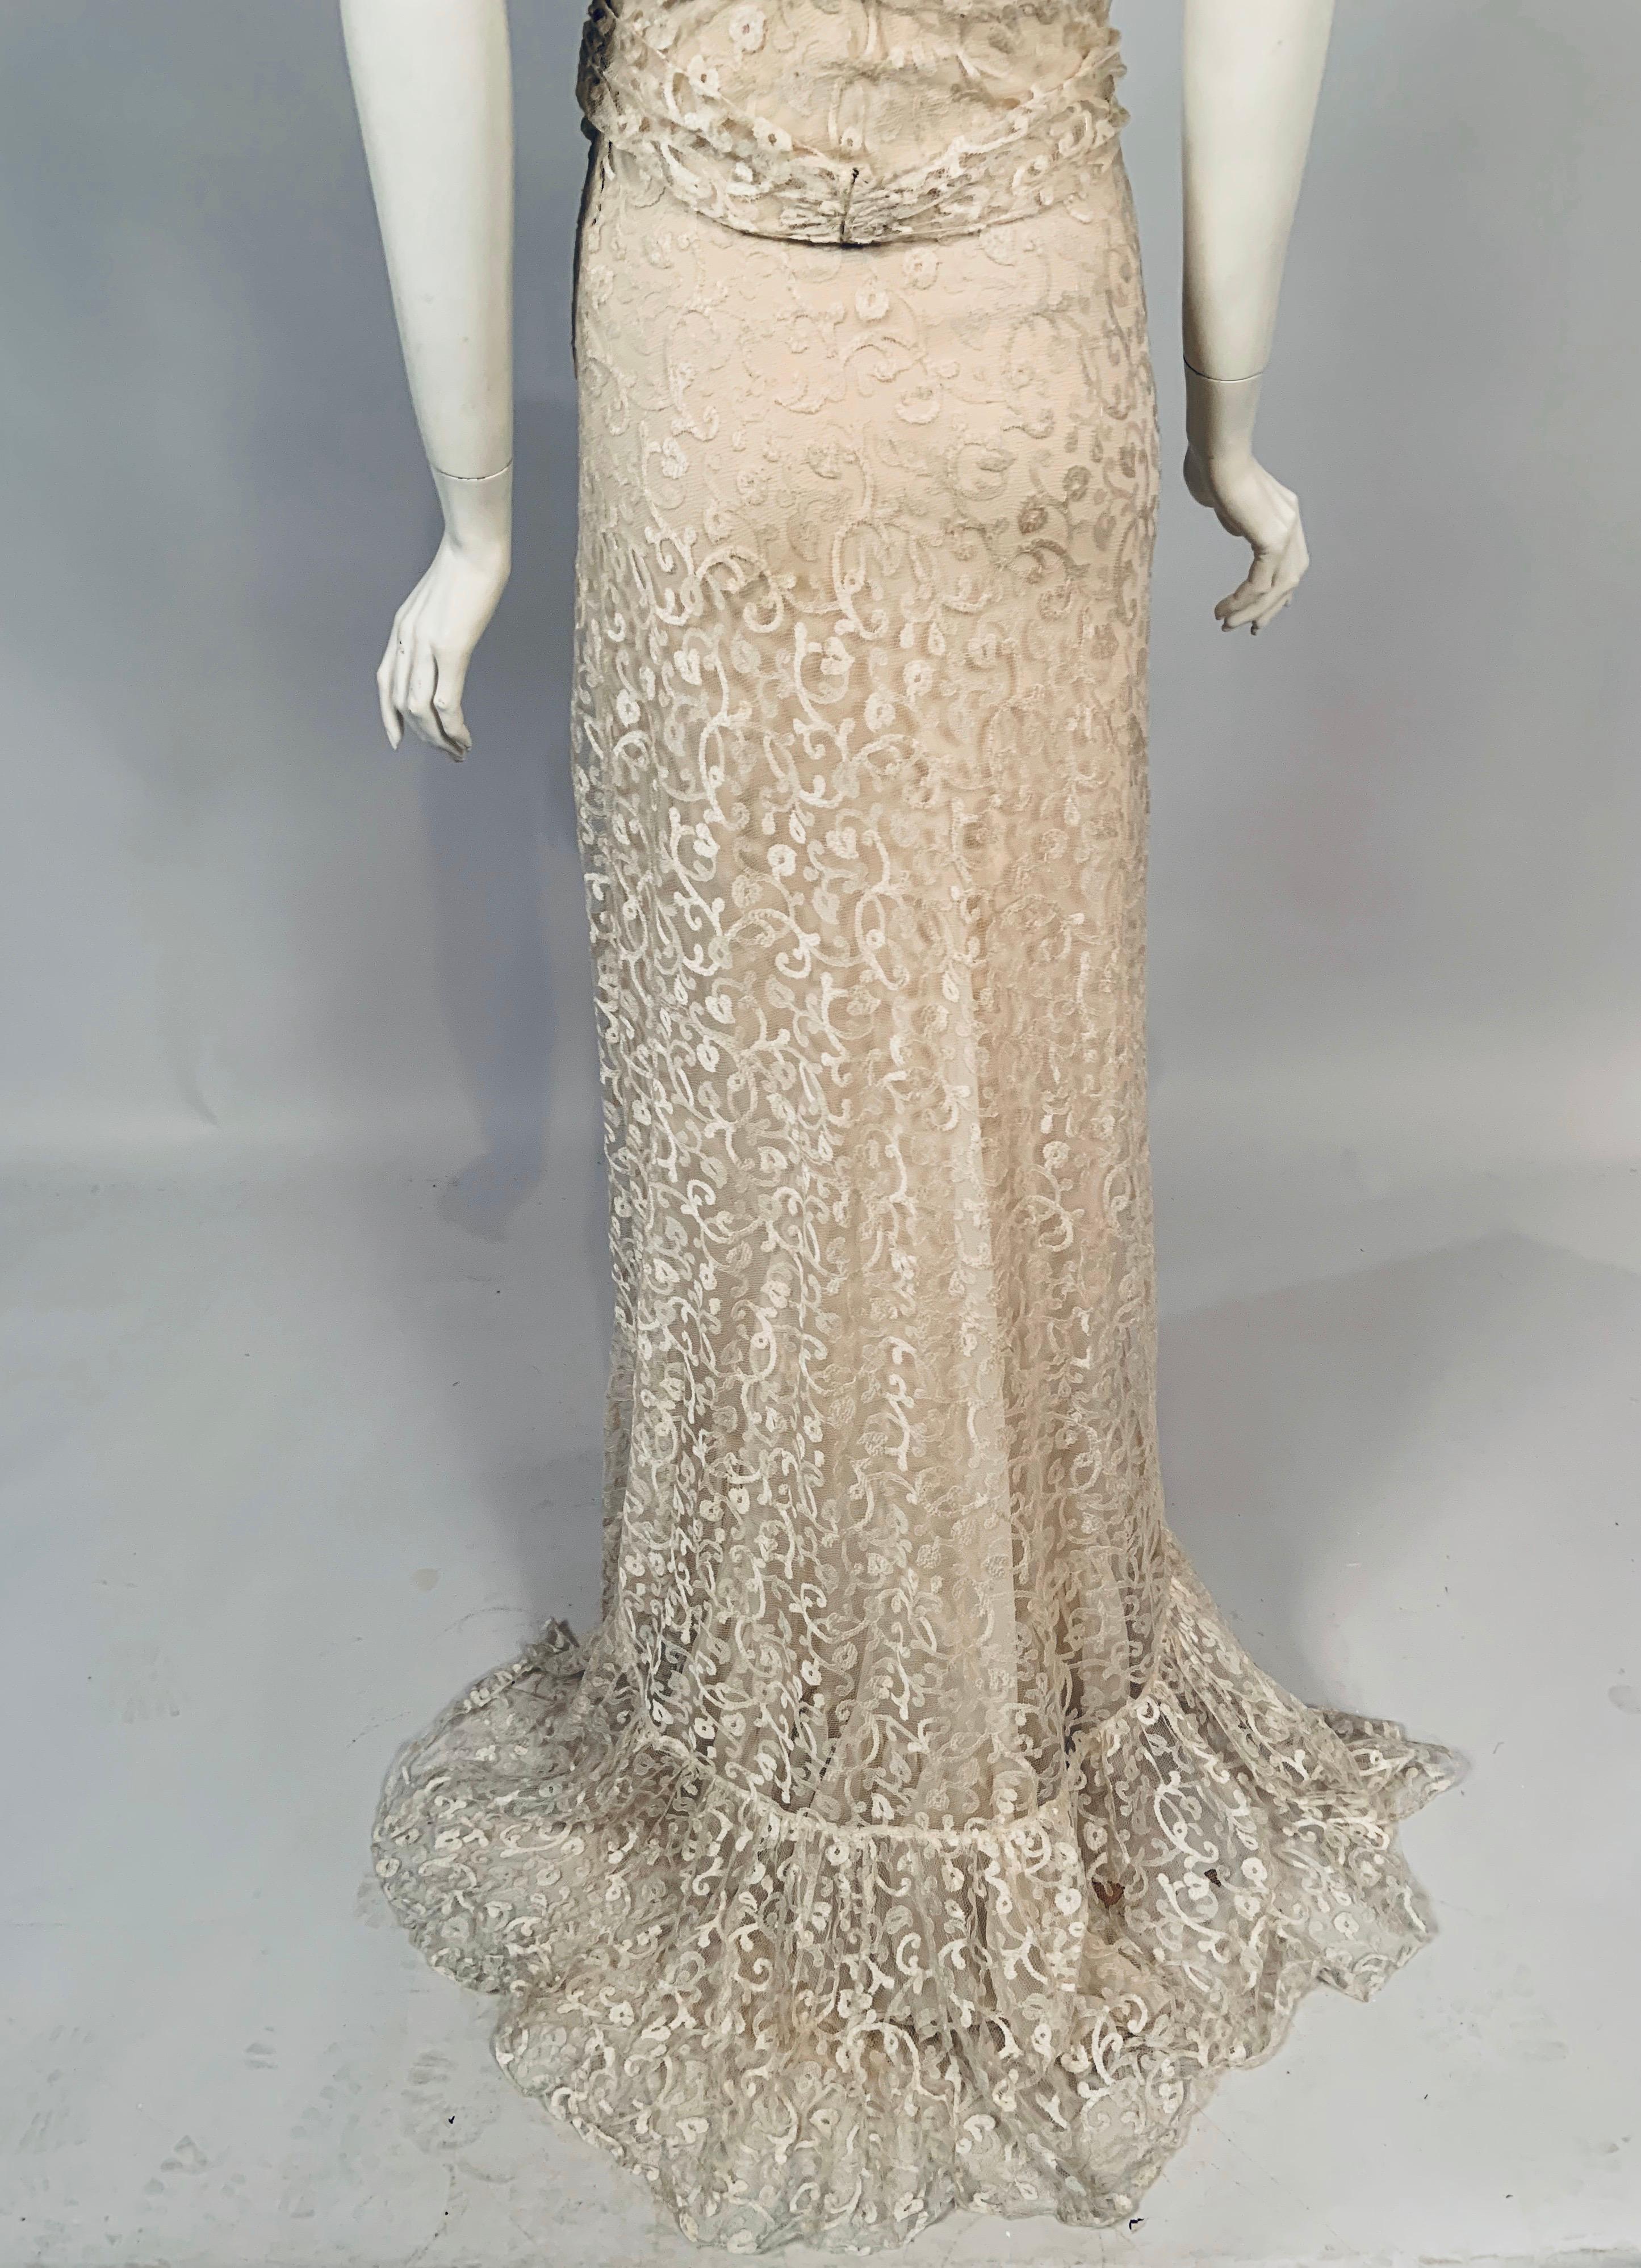 Women's French 1930' Ivory Lace Bias Cut Evening Gown and Chiffon Slip by Bialo, Paris